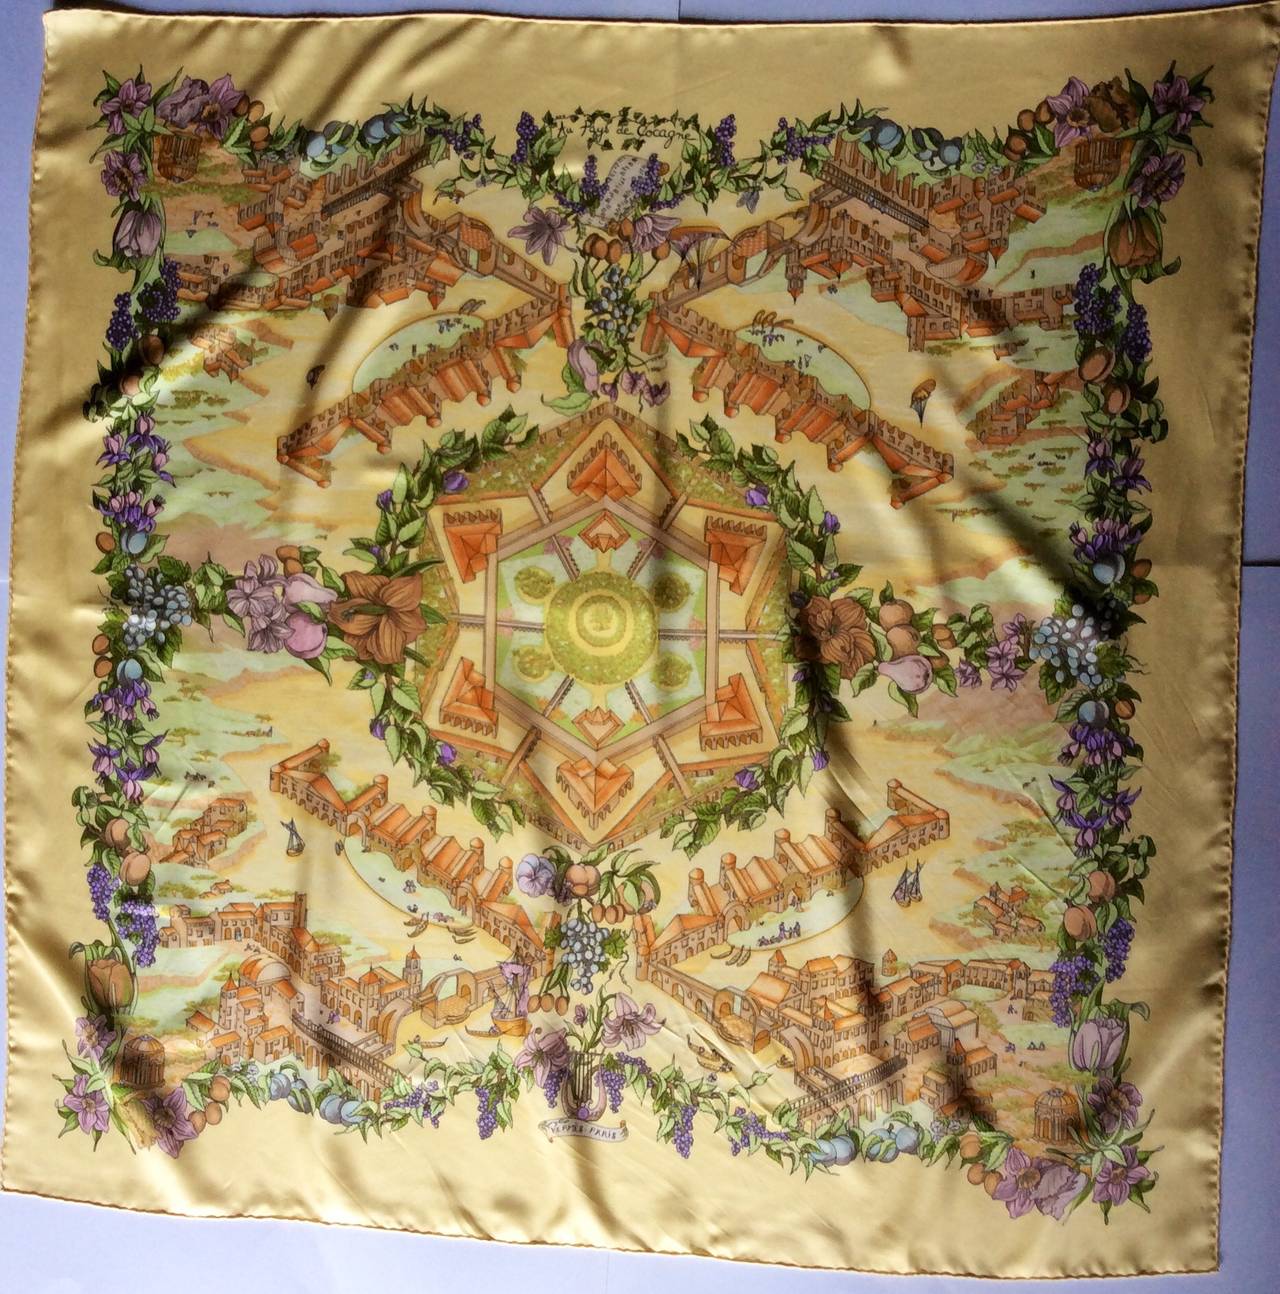 This is a lovely Hermes Paris 100% silk scarf
